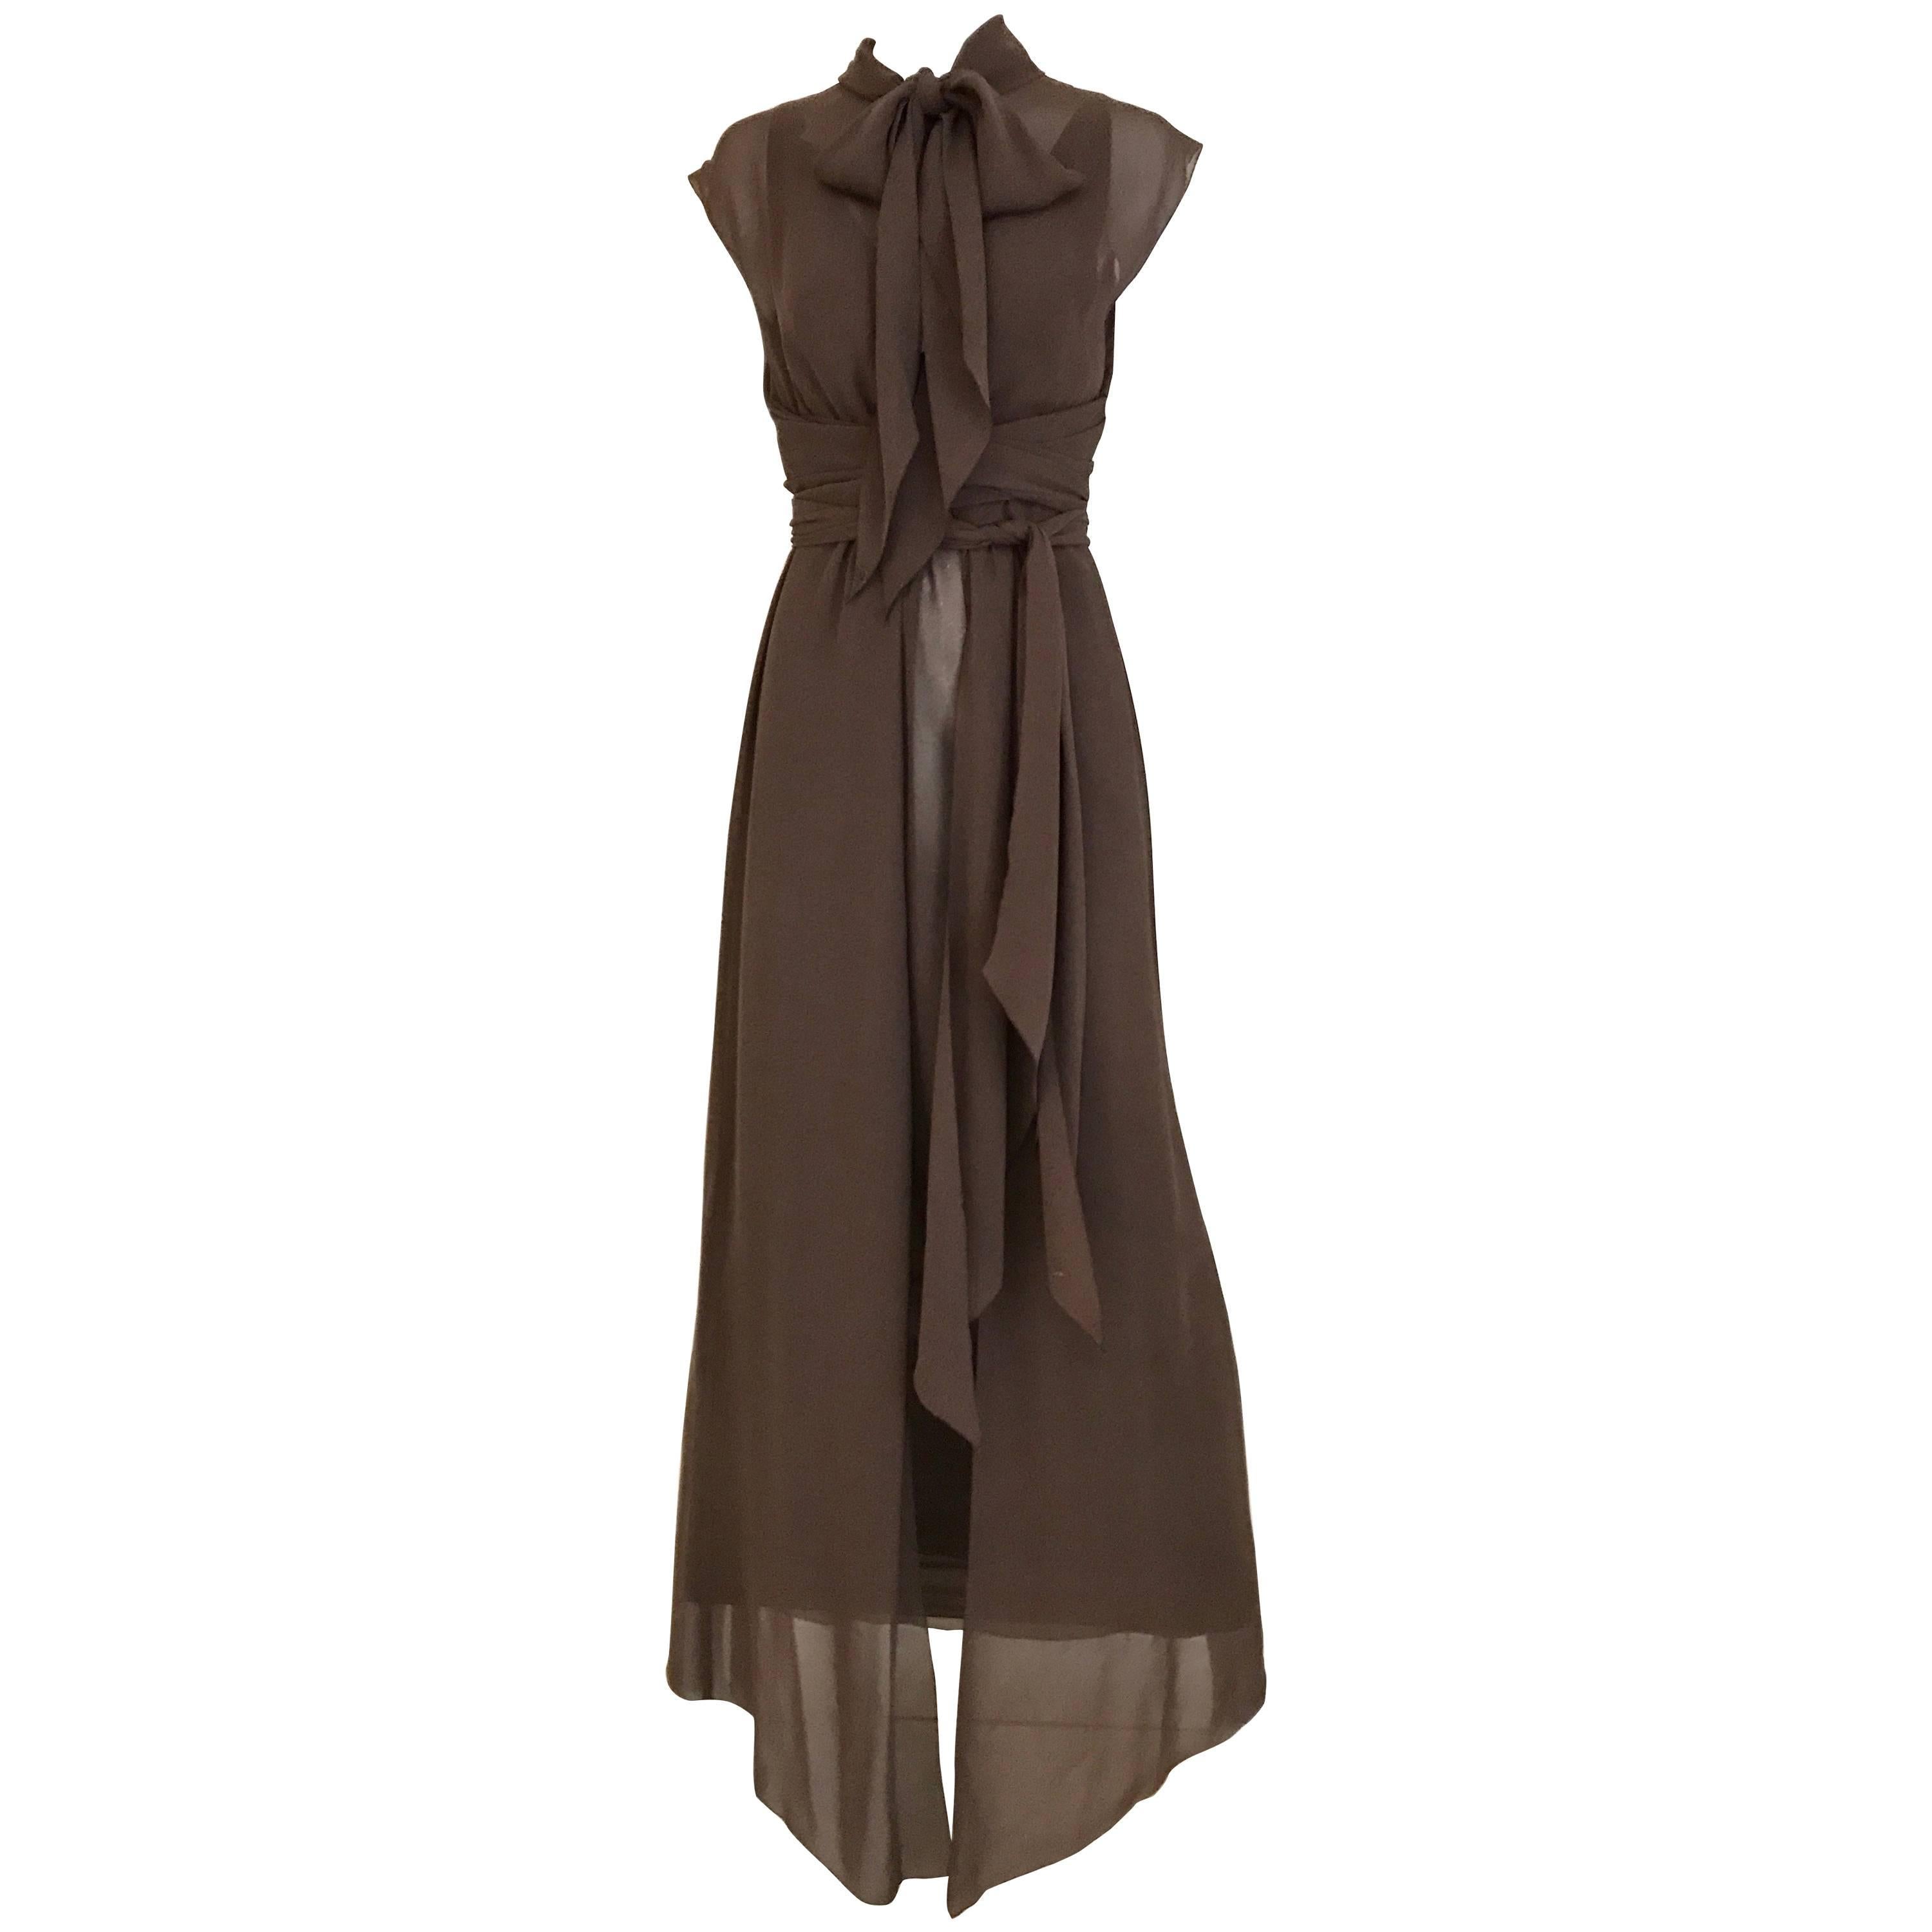 1990s CHANEL Brown Crepe Dress with Sleeveless Overlay Long Vest